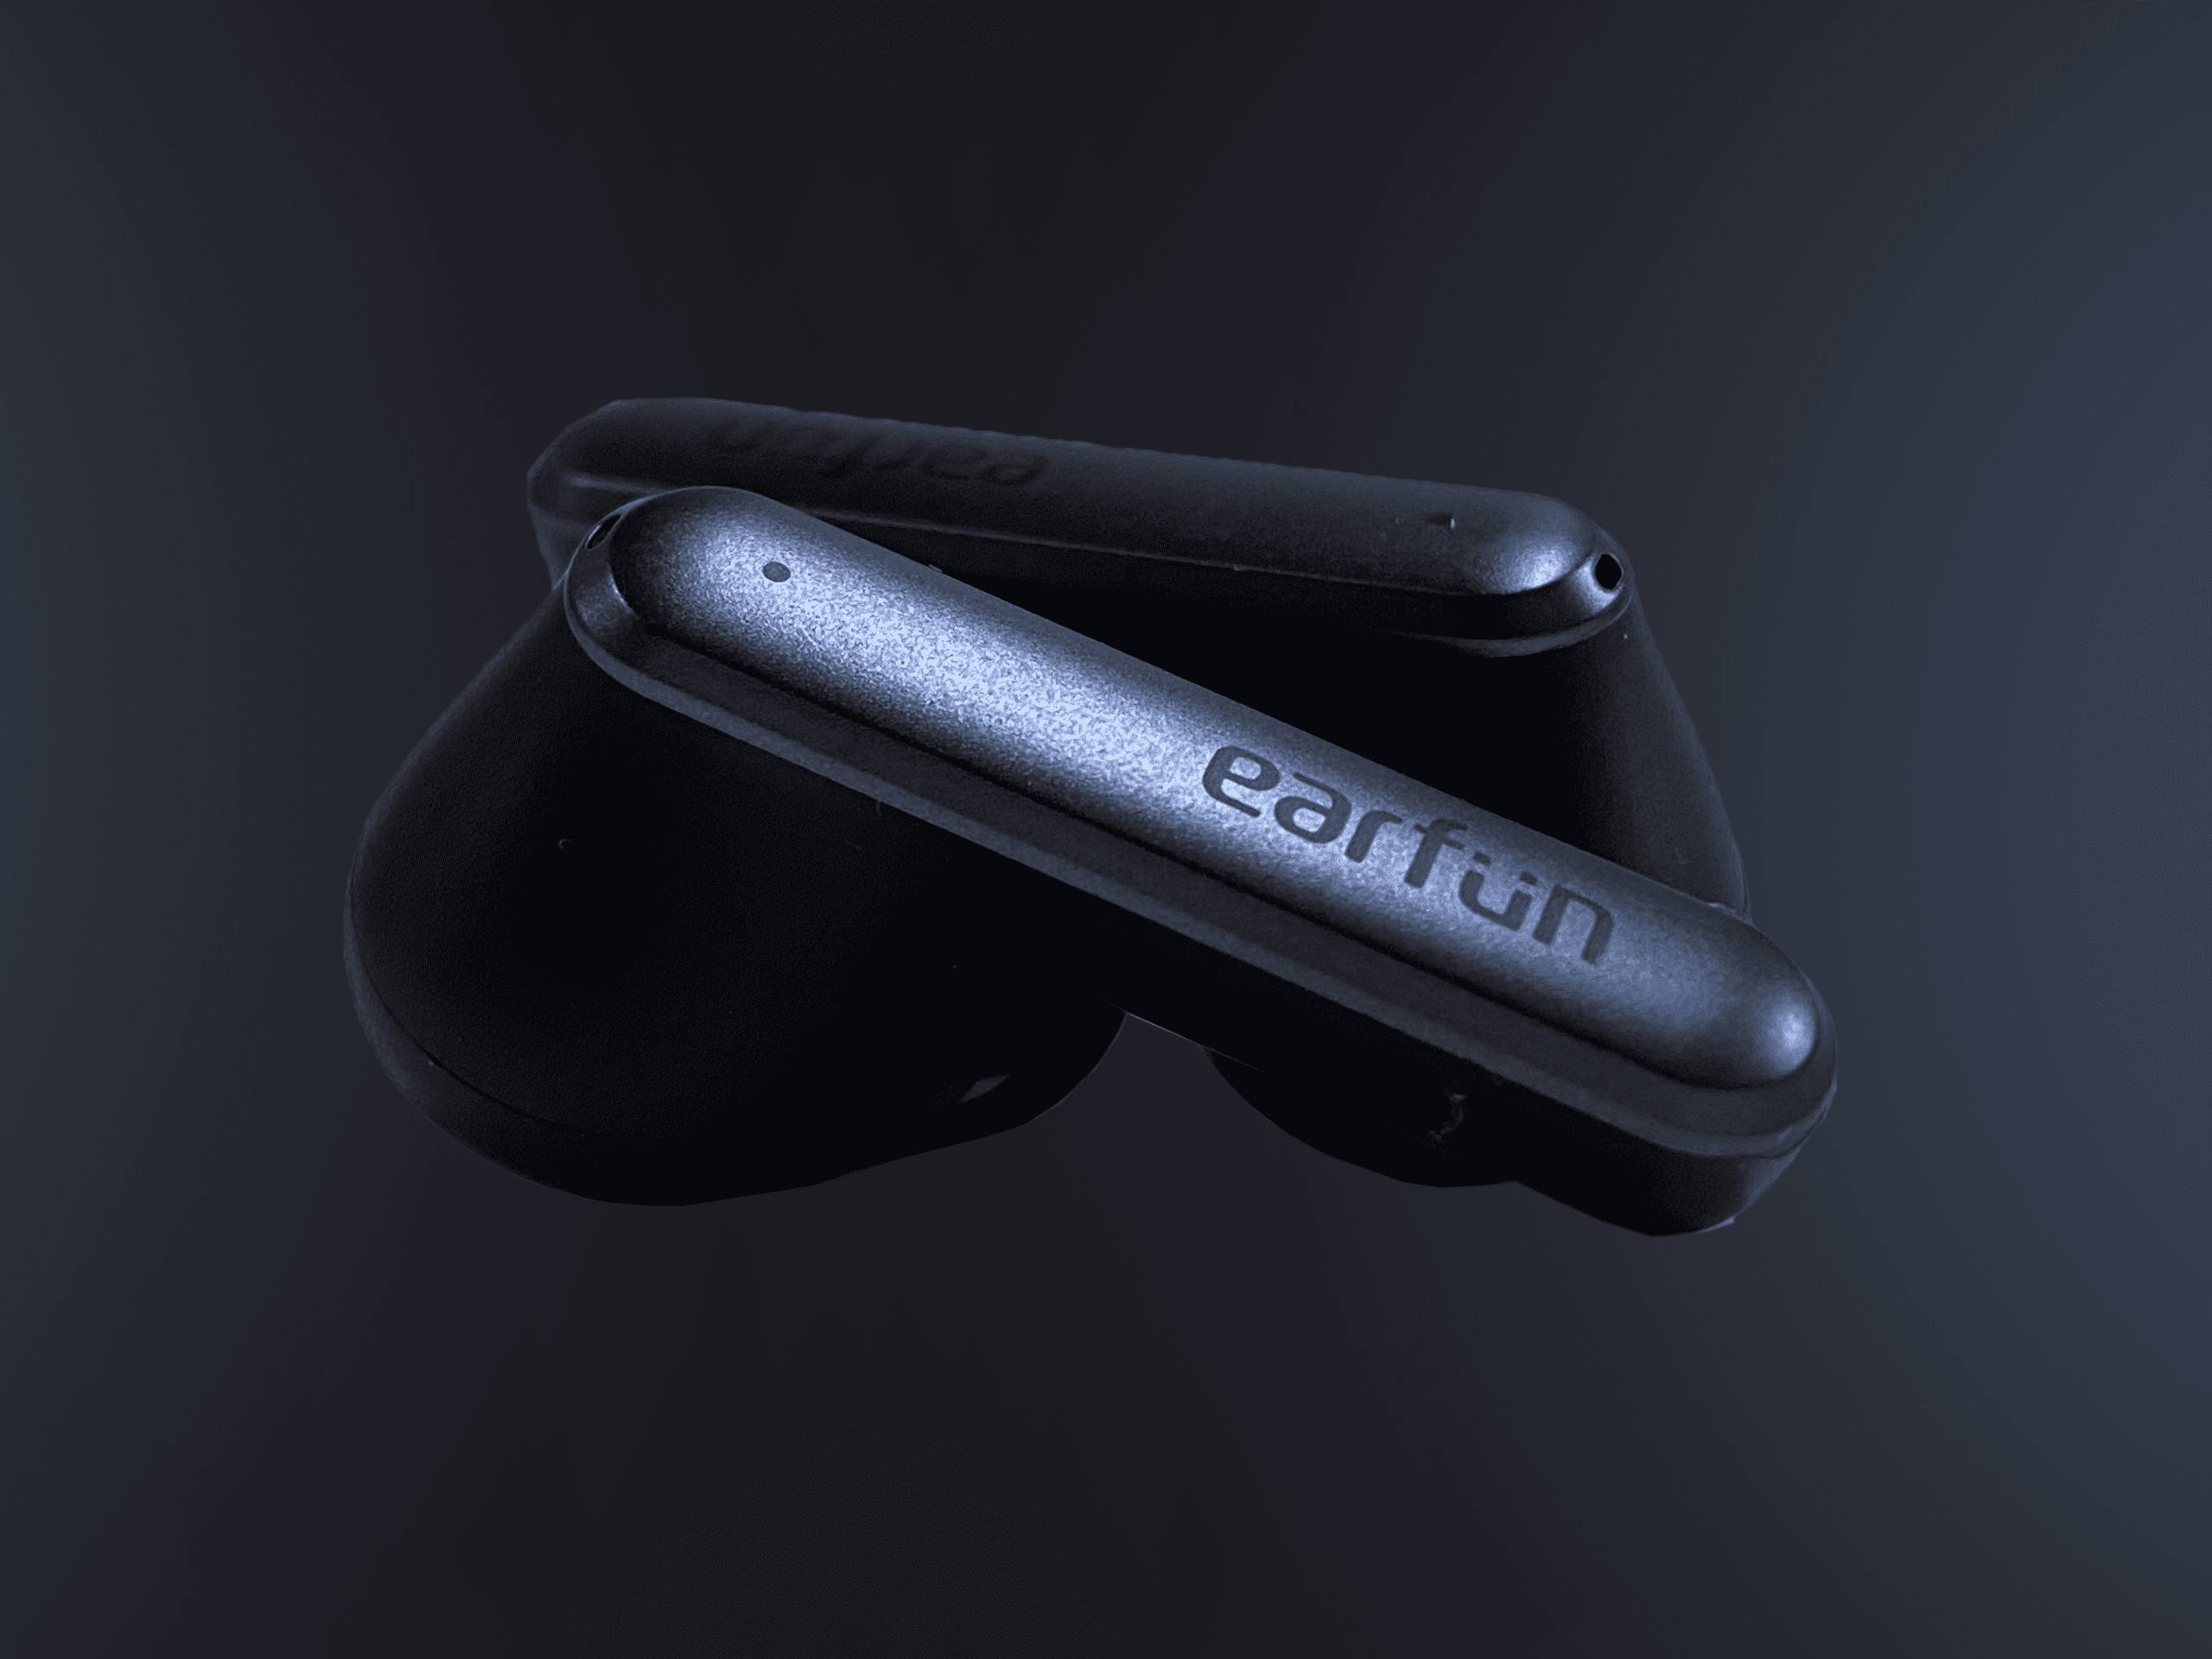 EarFun Air S review: good, cheap earbuds with tons of features